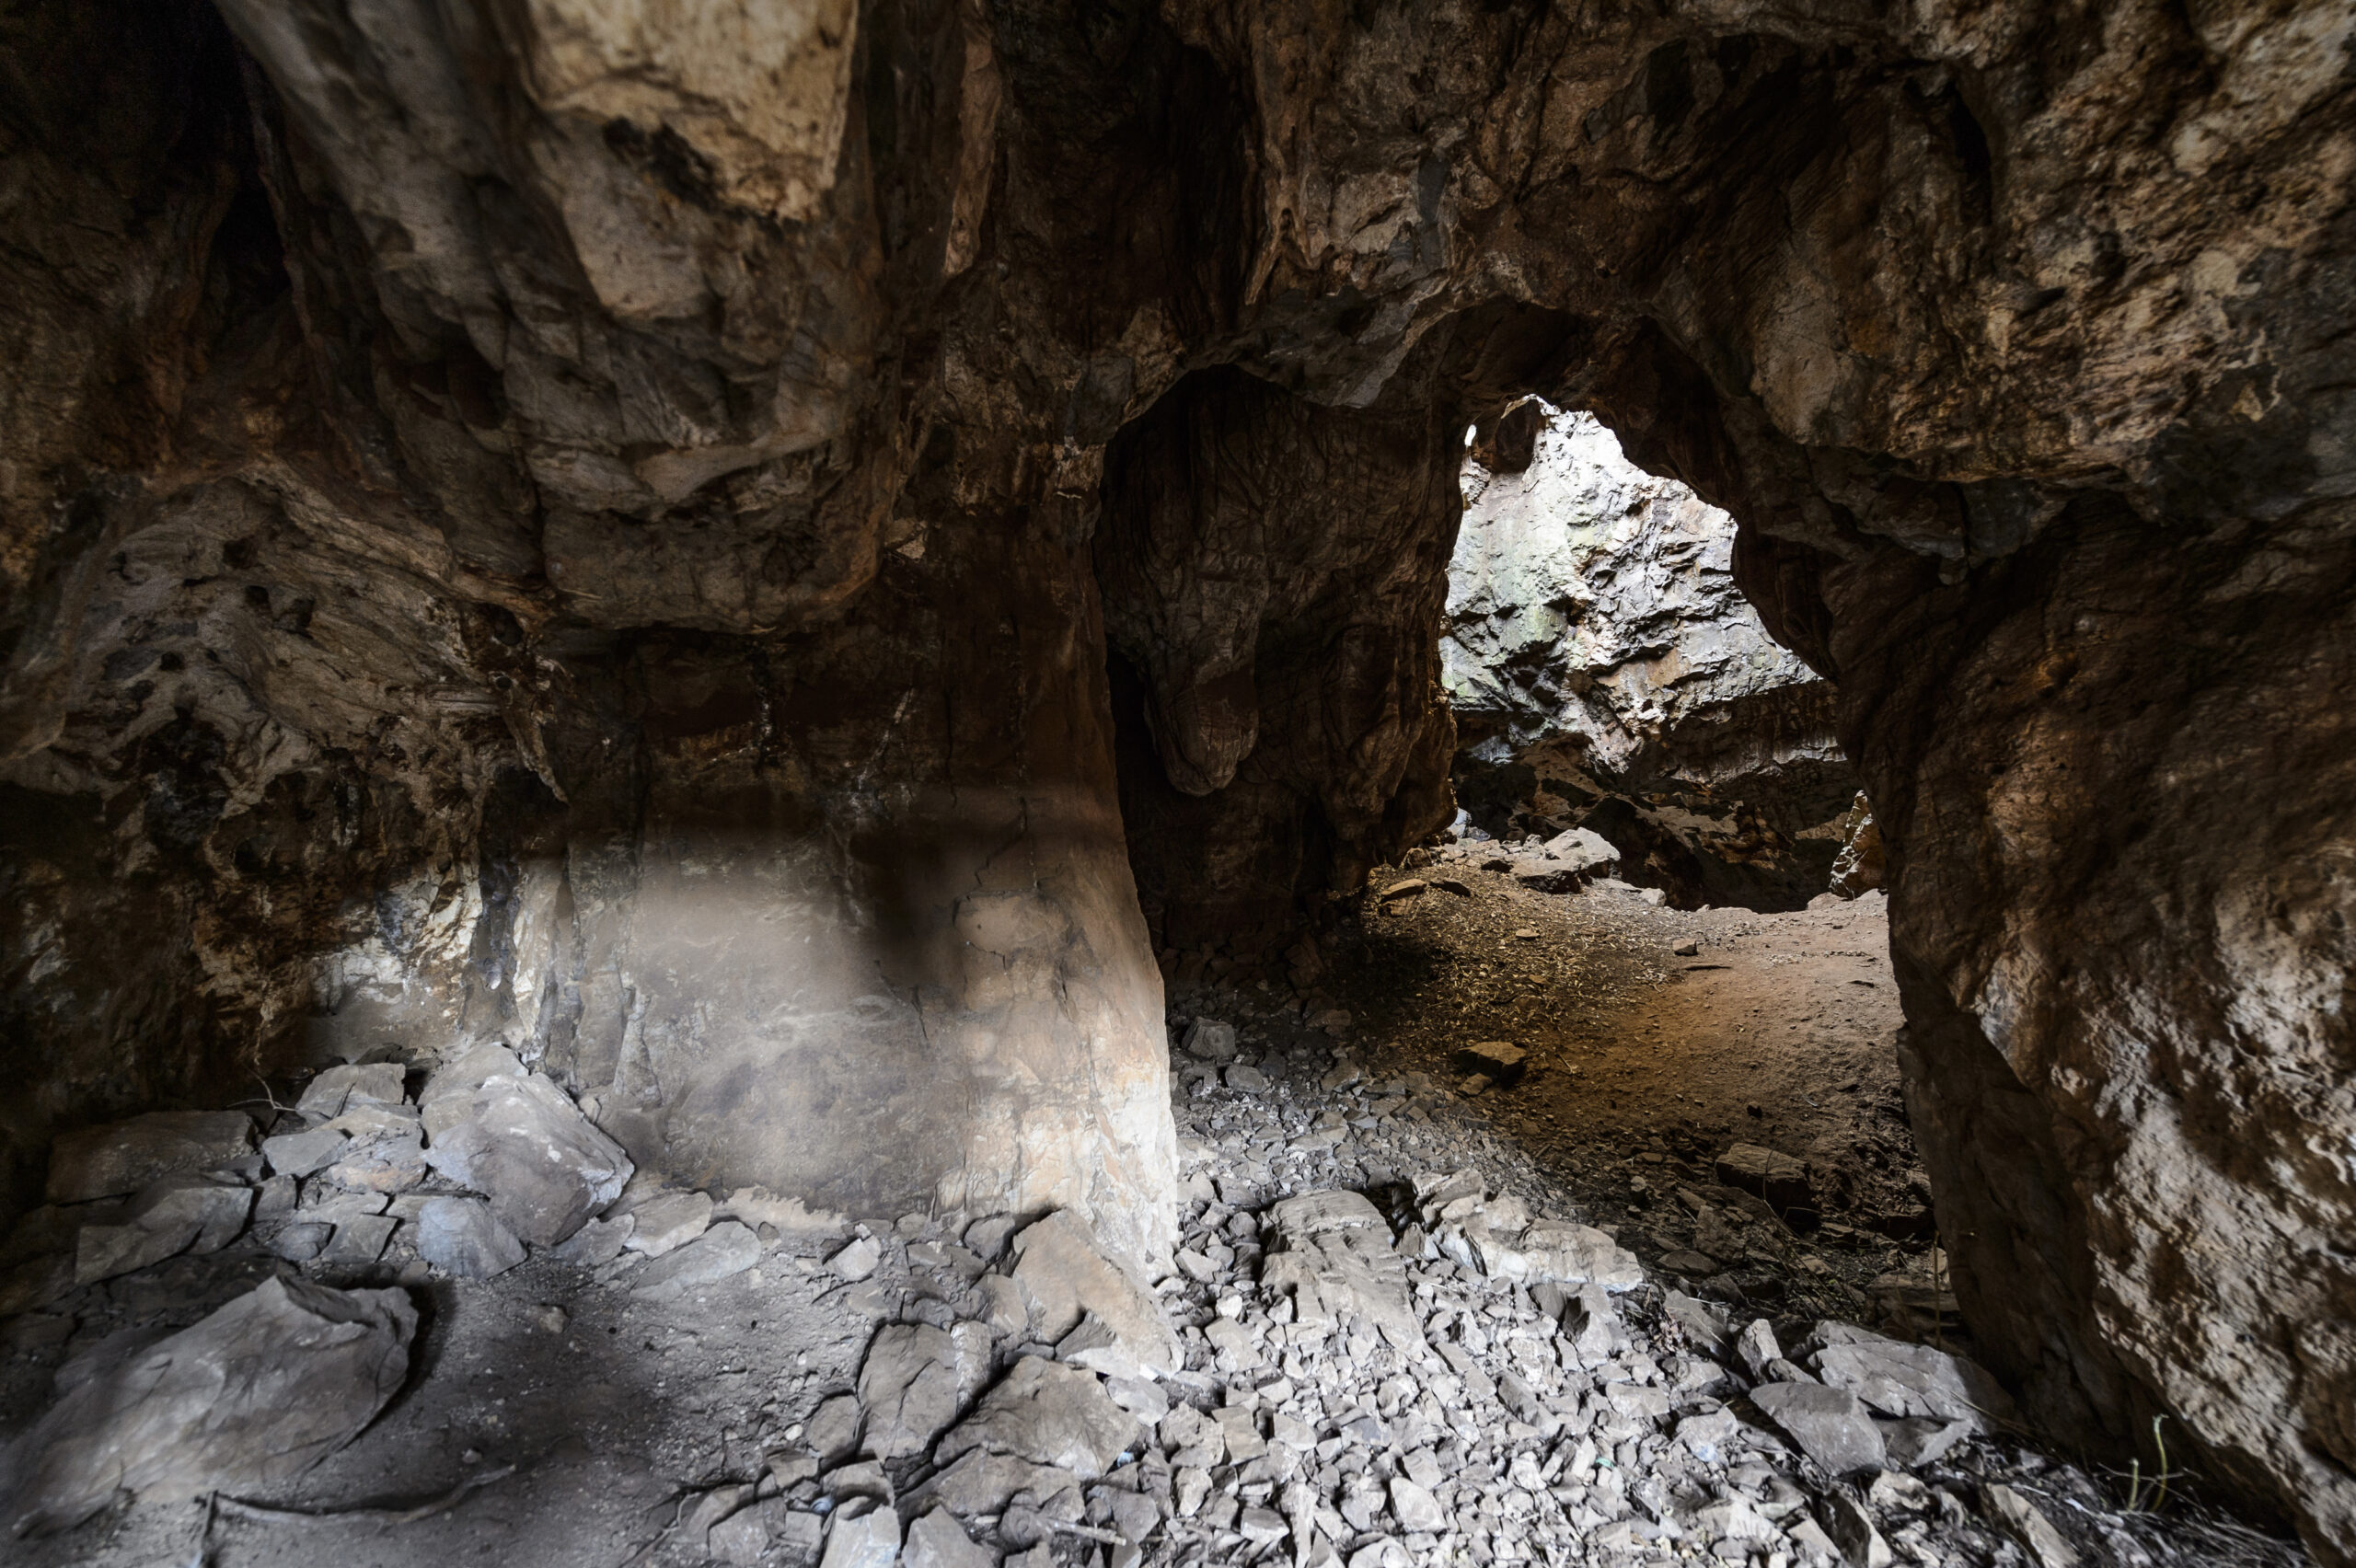 An entrance to the Dinaledi Chamber of the Rising Star Cave system.